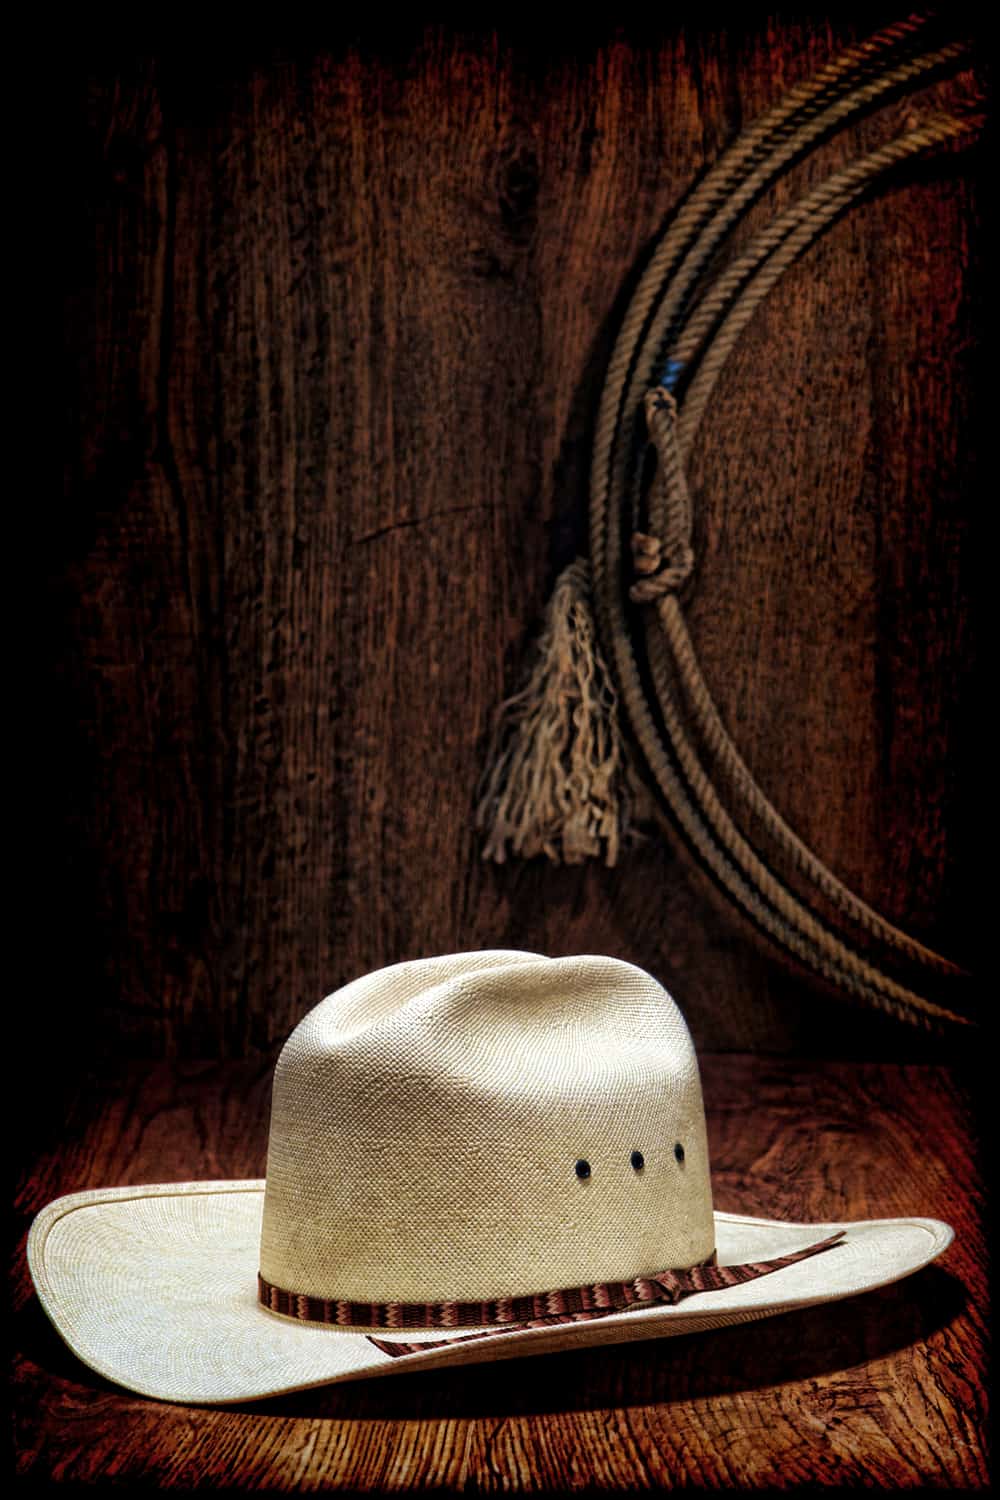 History of the Cowboy Hat Shapes